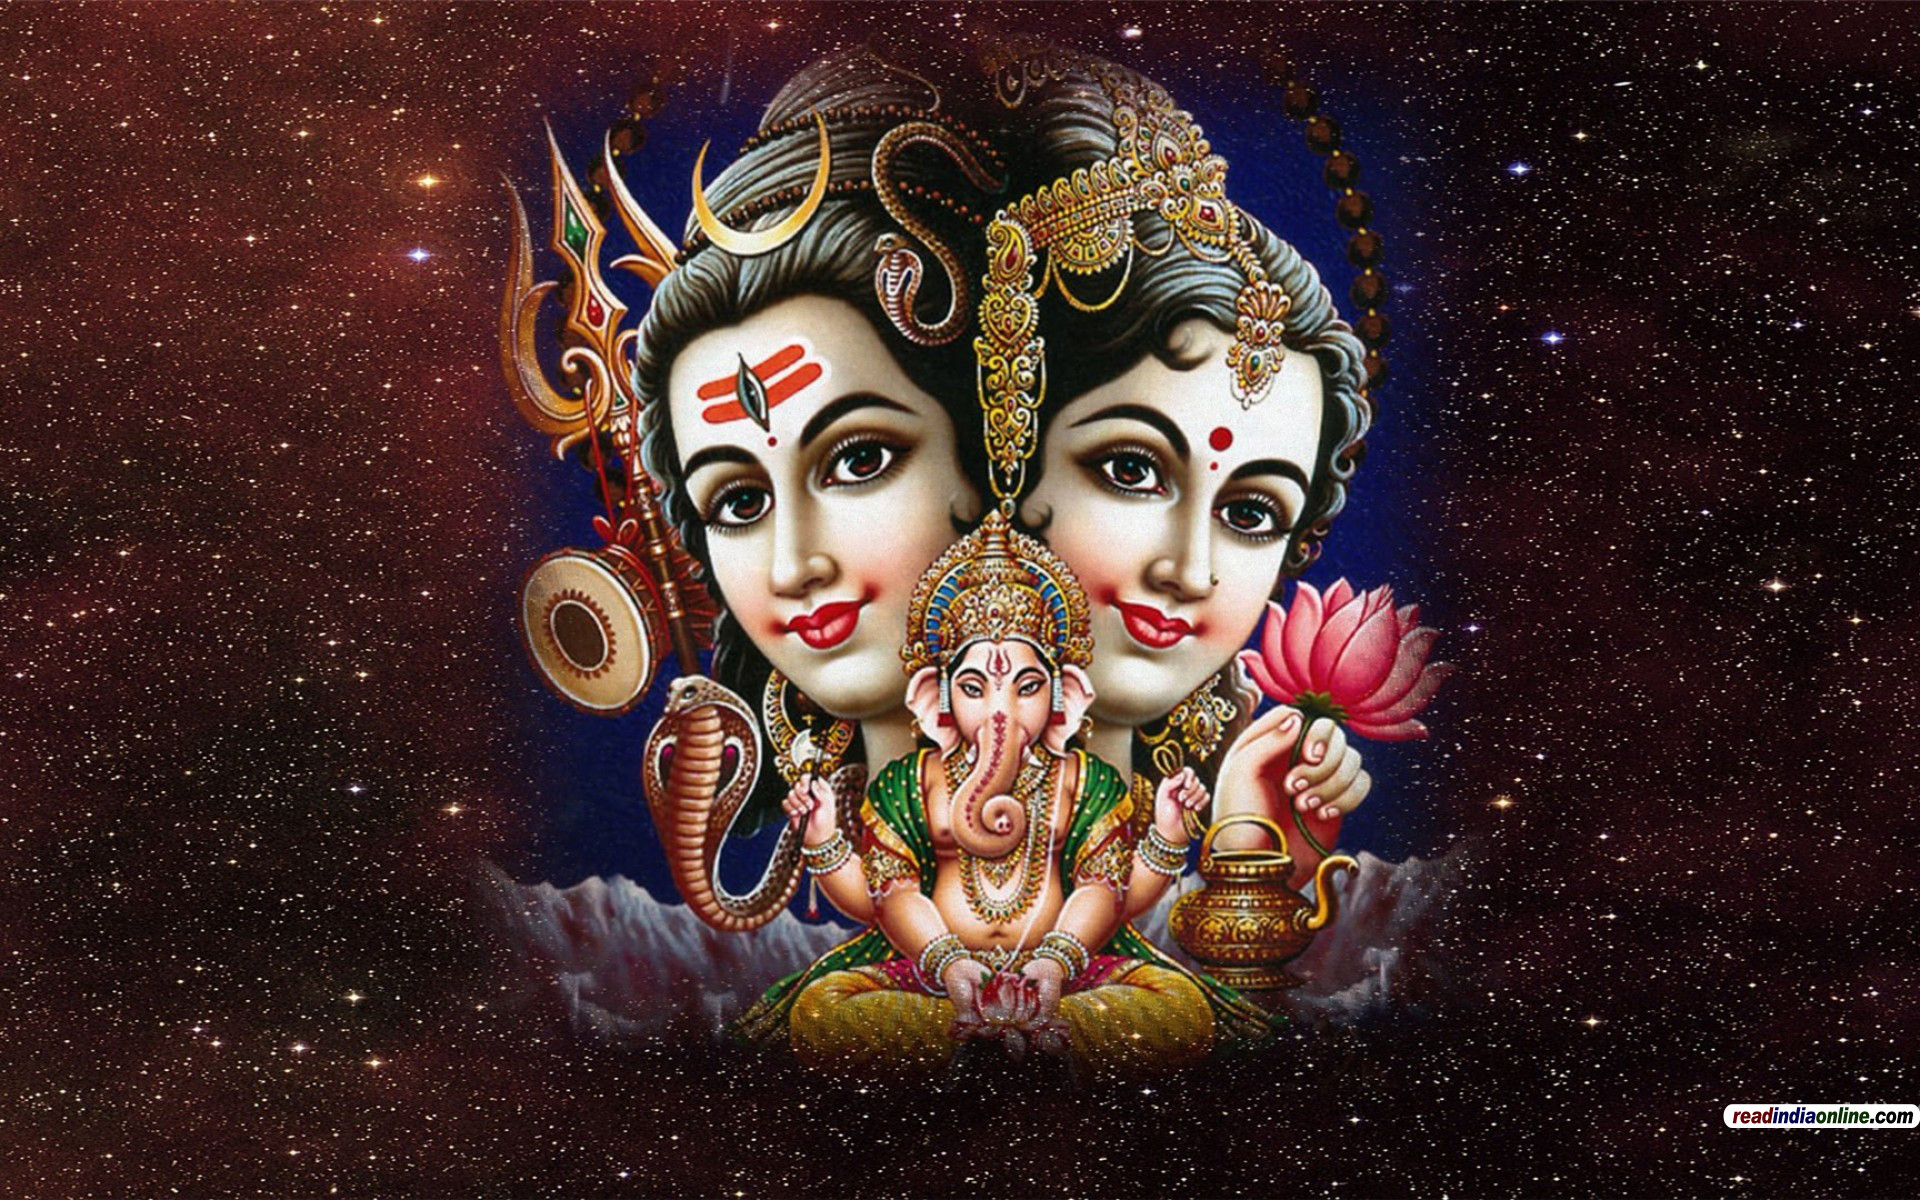 1920x1200 Search Results for “sree ganesha hd wallpaper” – Adorable Wallpapers